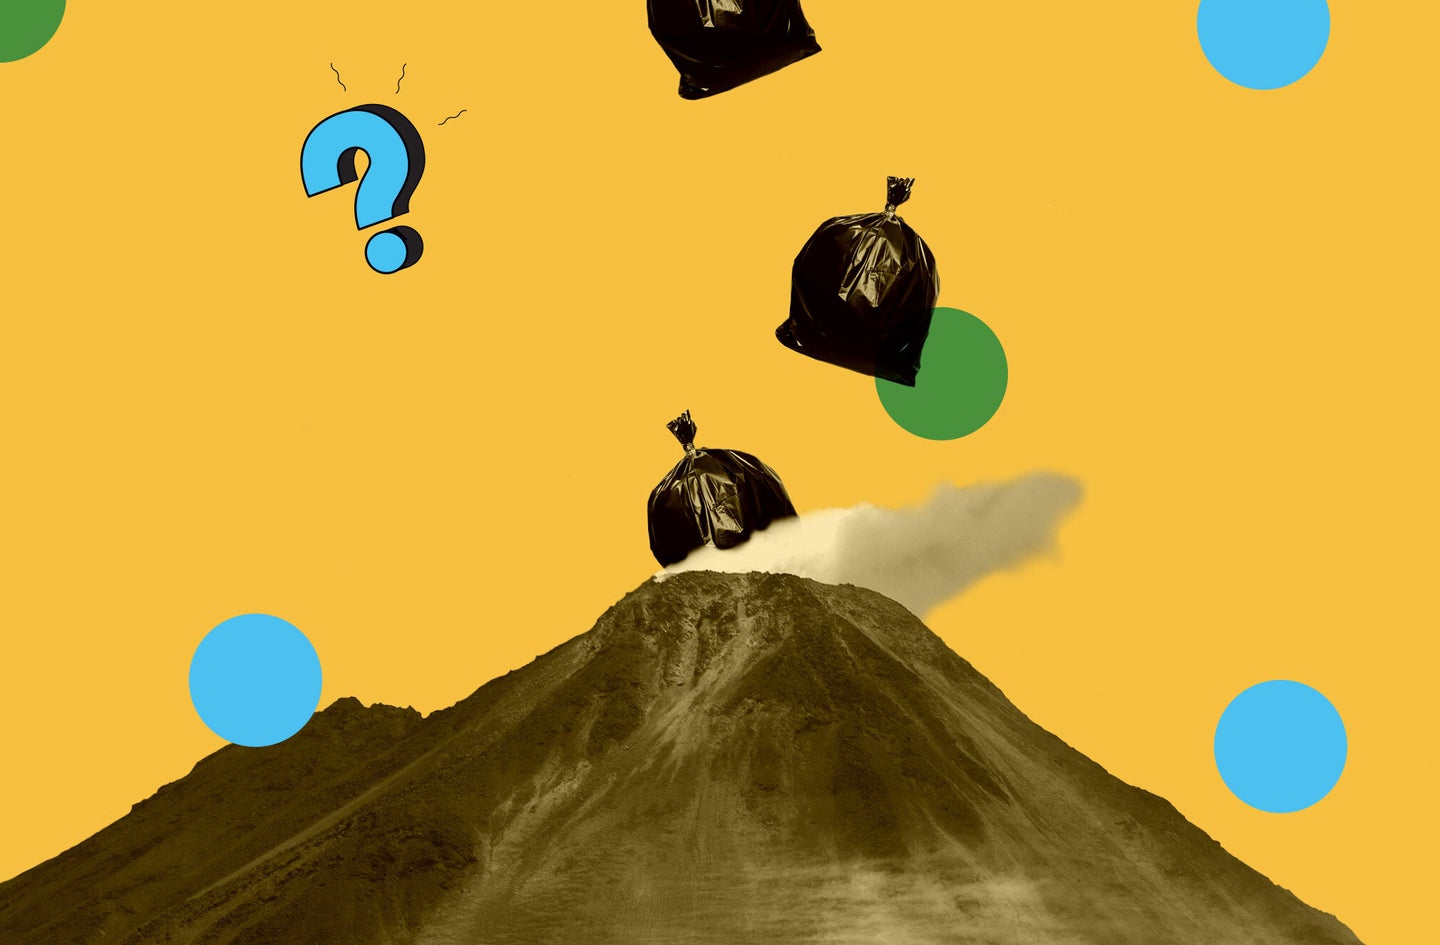 trash falling into a volcano under the ask us anything logo